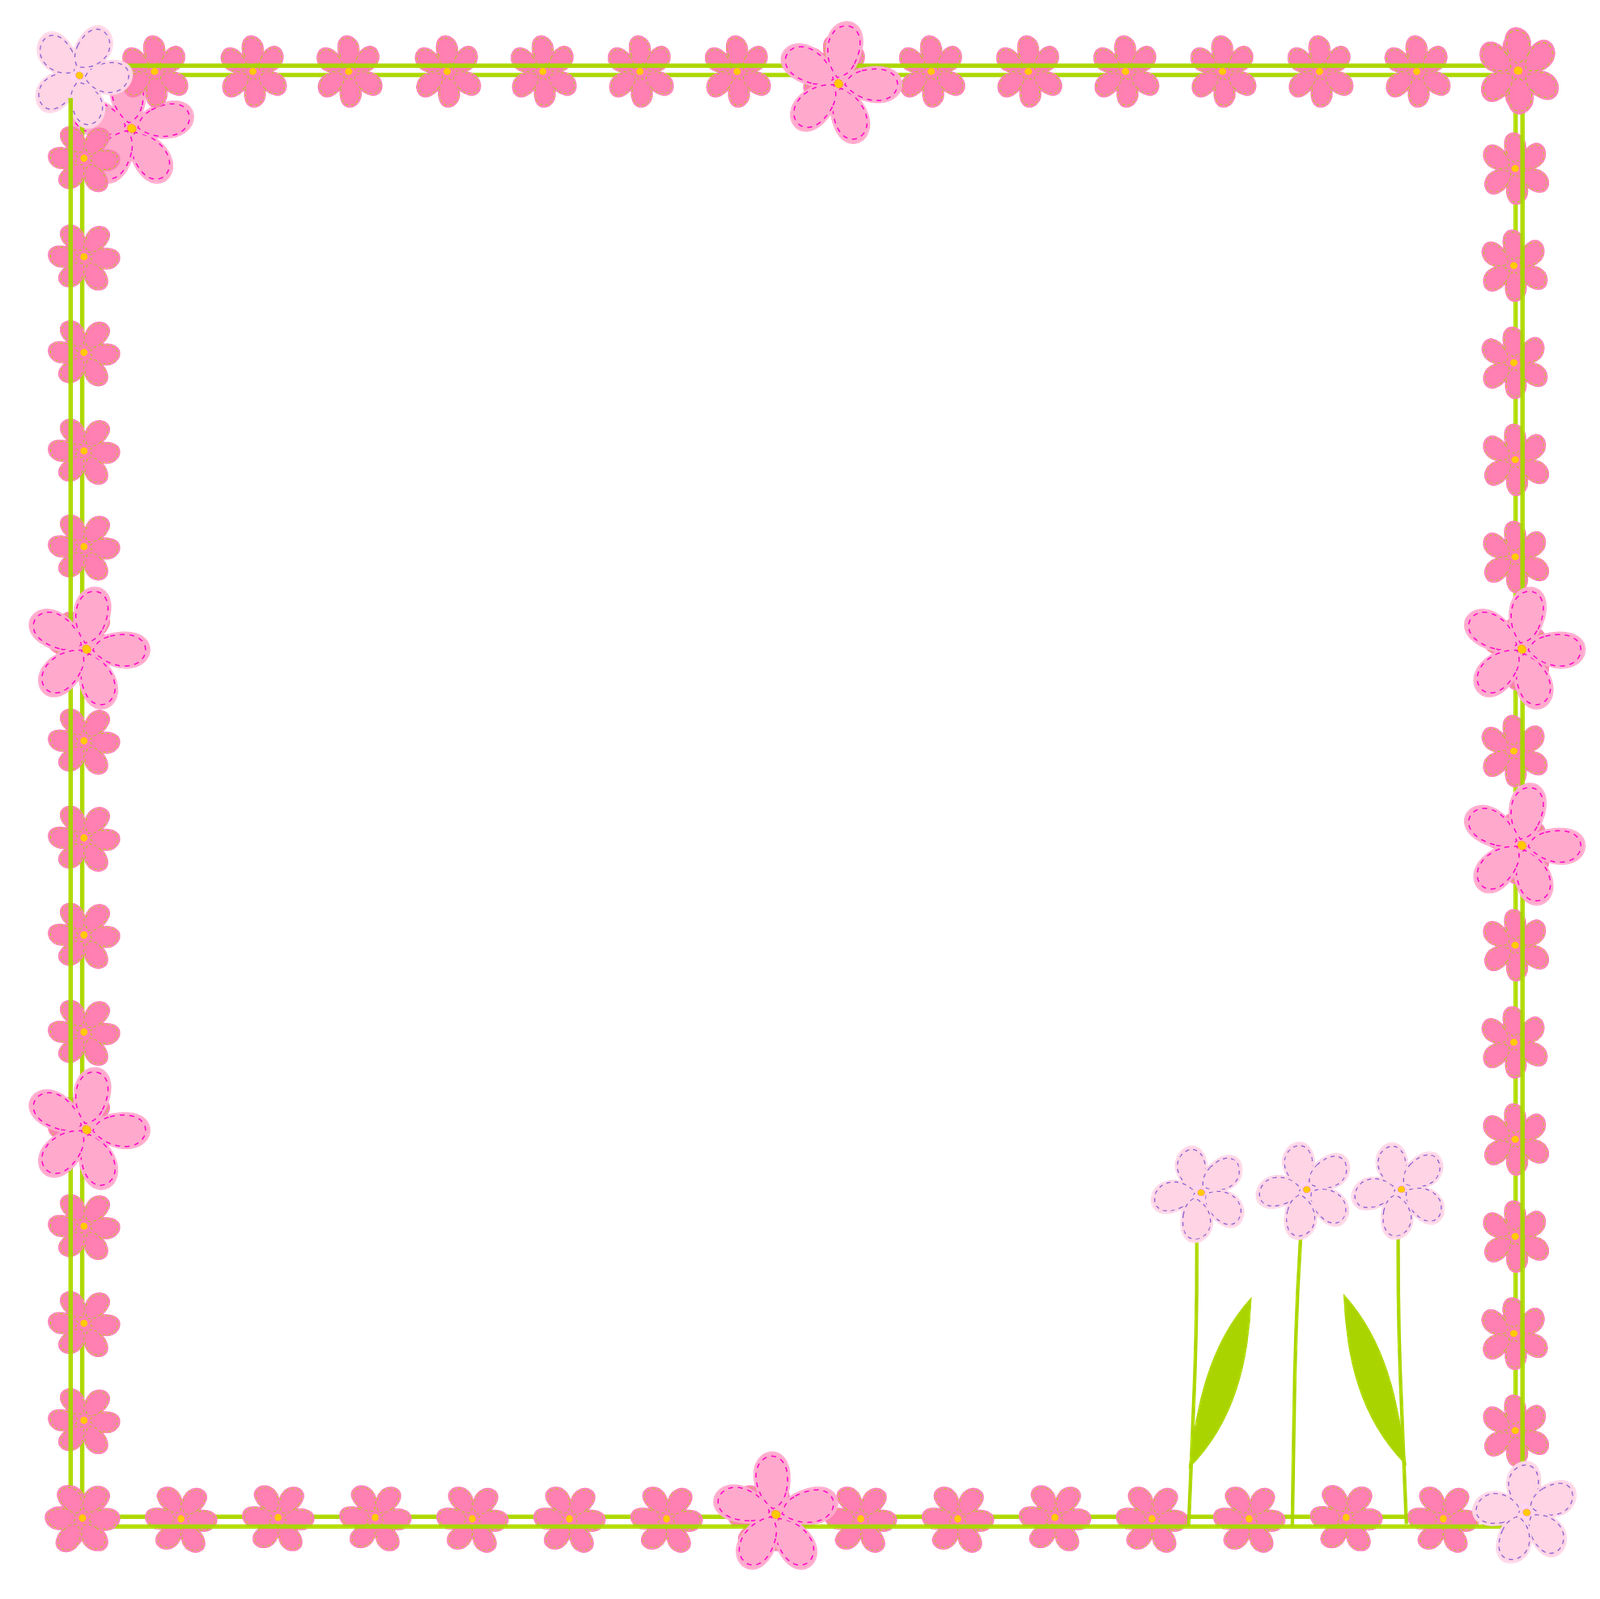 Free Printable Floral Borders And Frames | Free Download Clip Art ...